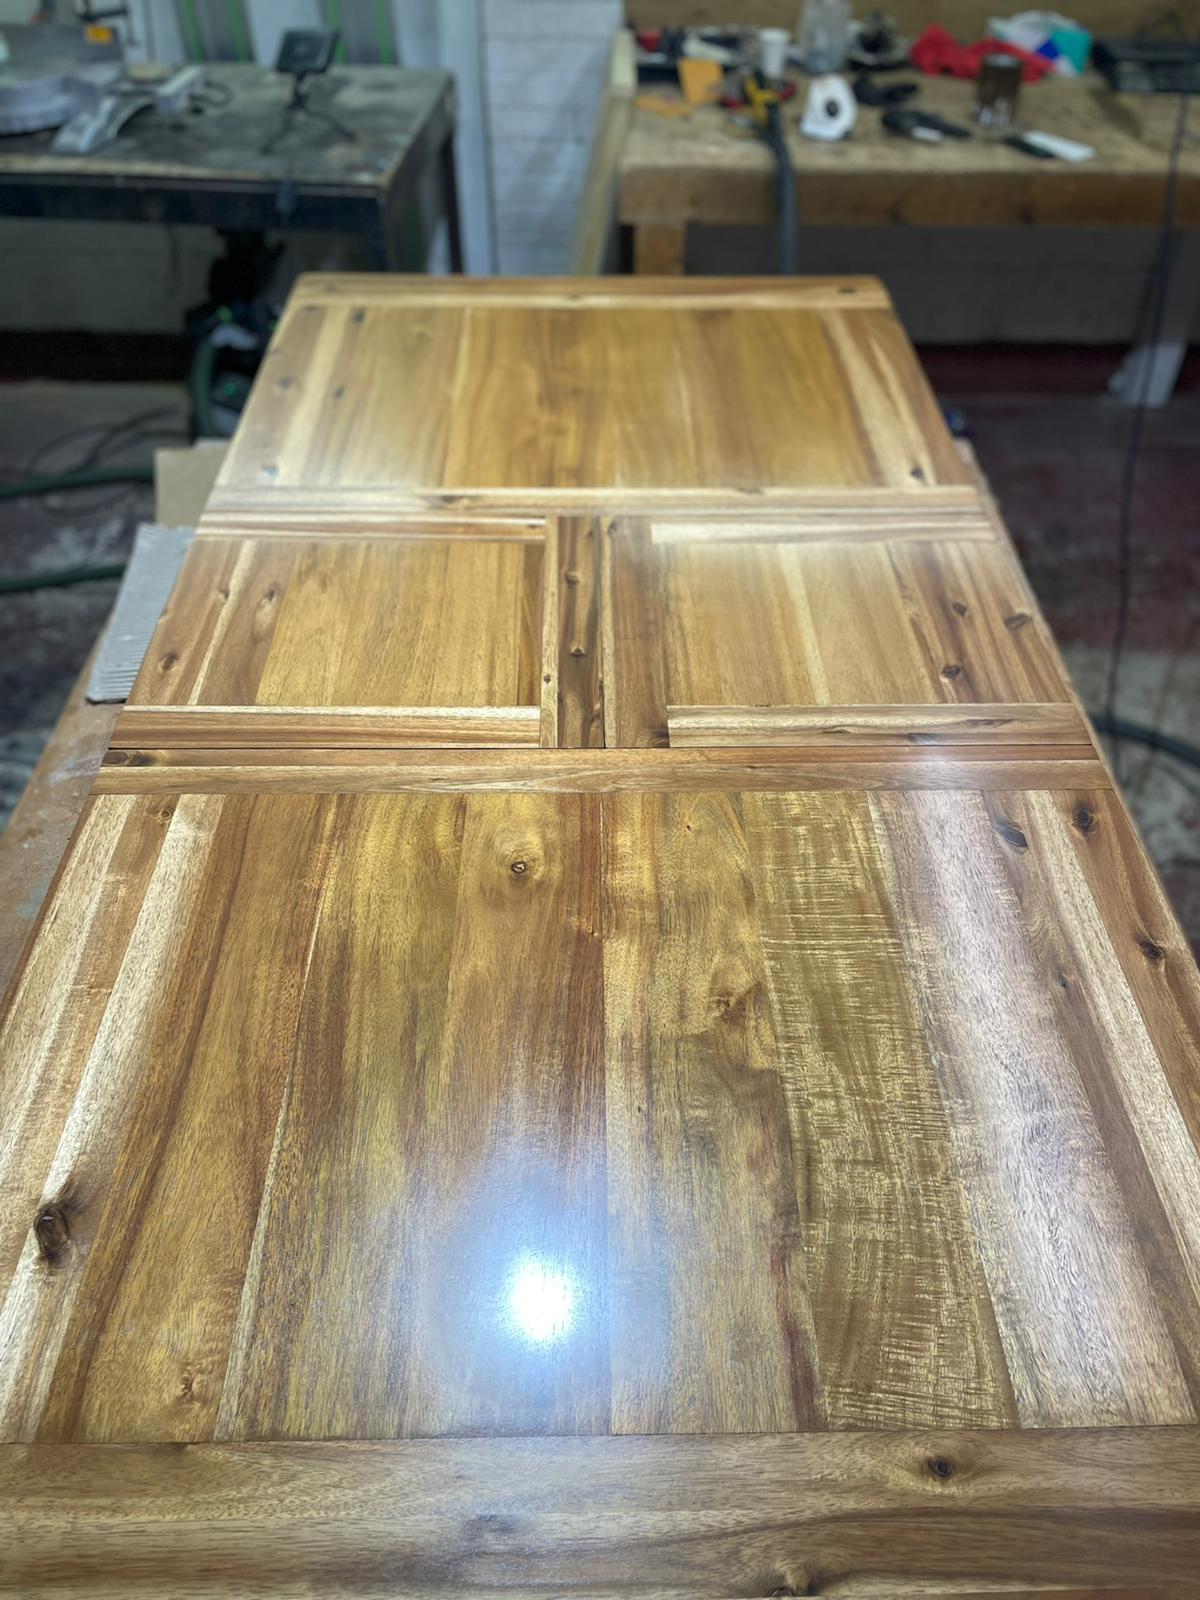 Large wooden table renovated